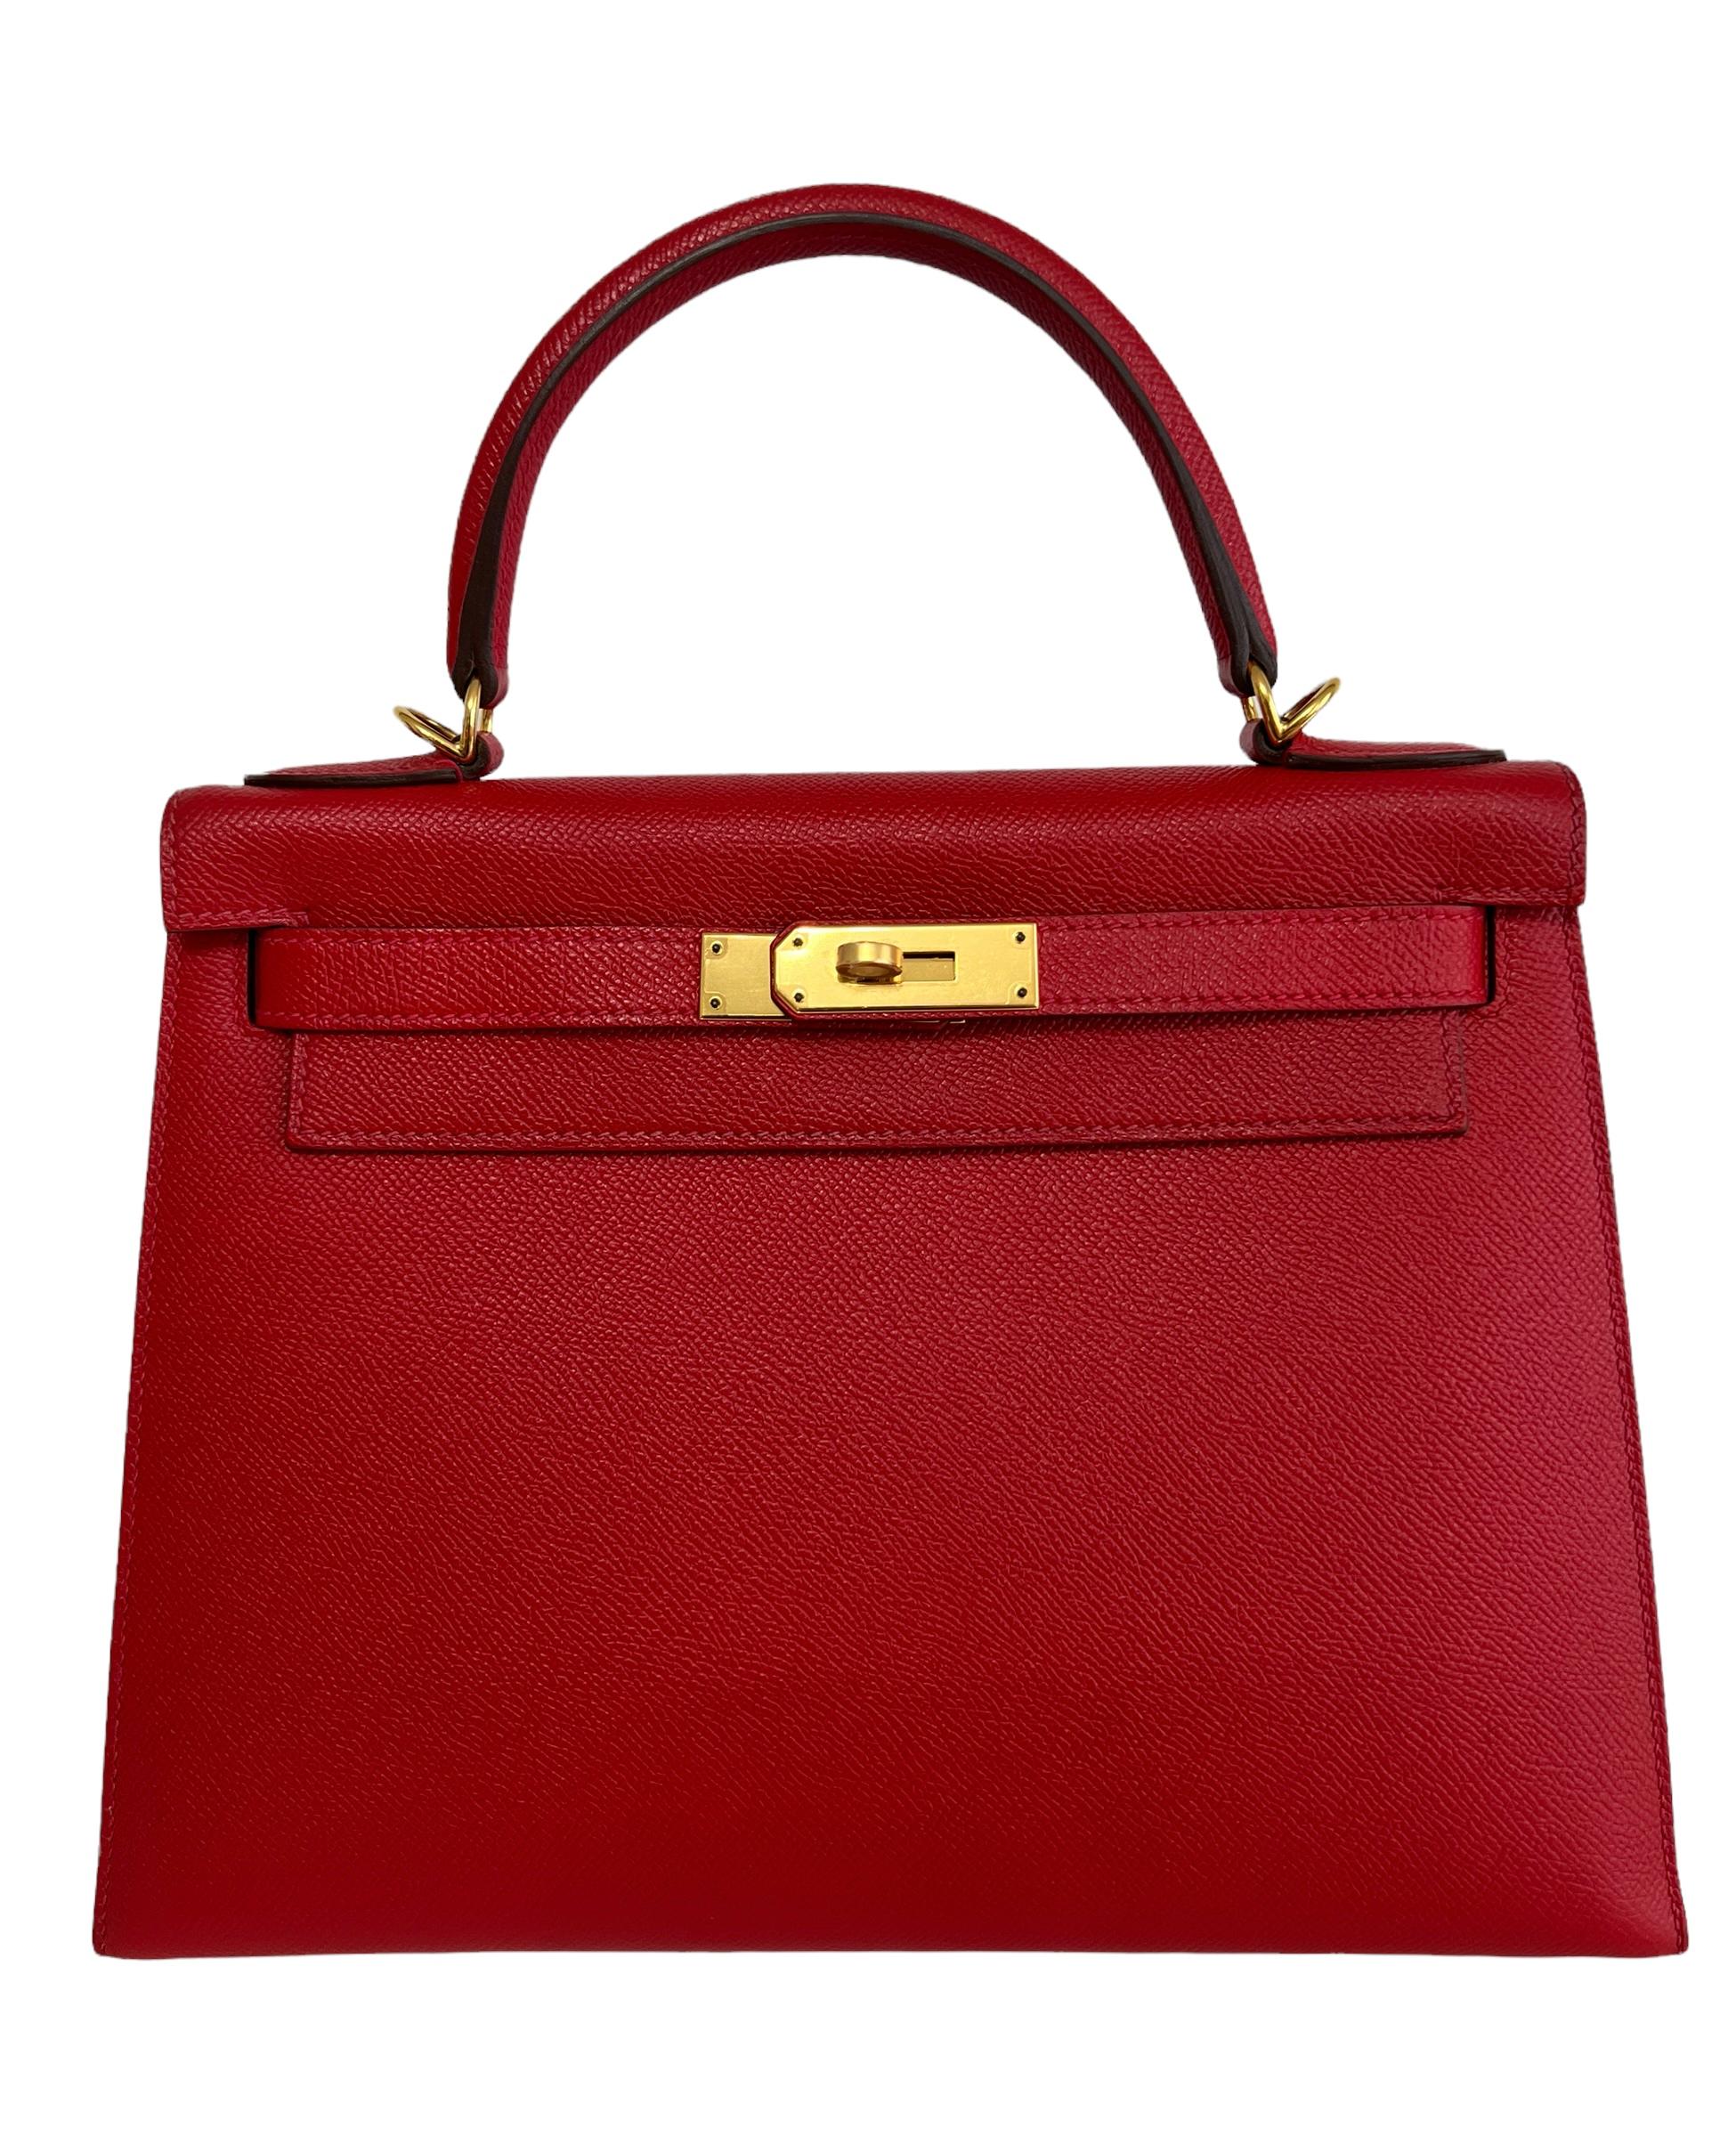 
Beautiful Hermes Kelly 28 Sellier Rouge Casaque Epsom Leather. Complimented by Gold Hardware. Excellent Pristine Condition with Plastic on Hardware. 2015 T Stamp. 

Shop with Confidence from Lux Addicts. Authenticity Guaranteed! 
